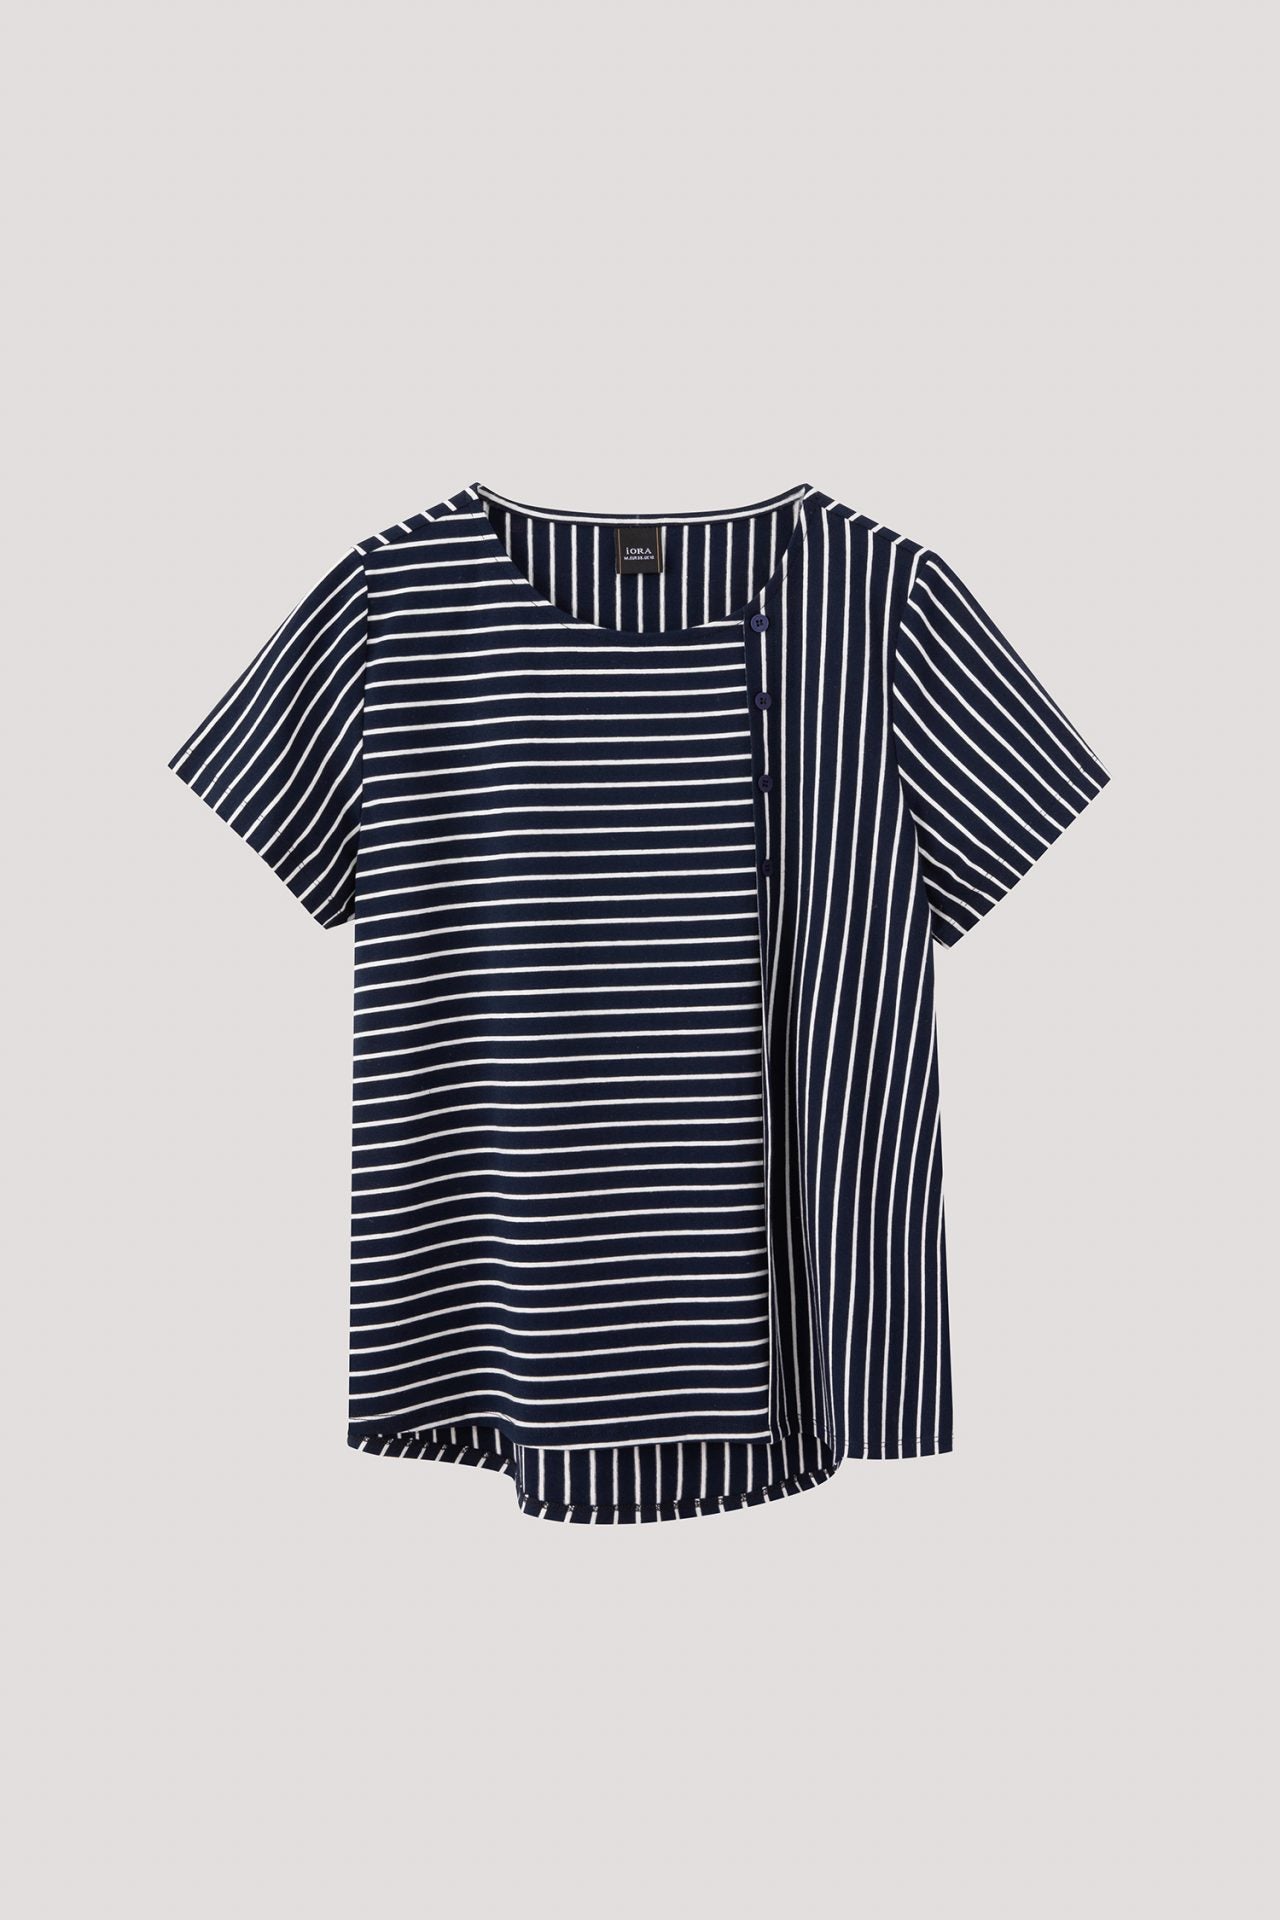 AT 10427 SIDE BUTTON STRIPED TEE NAVY